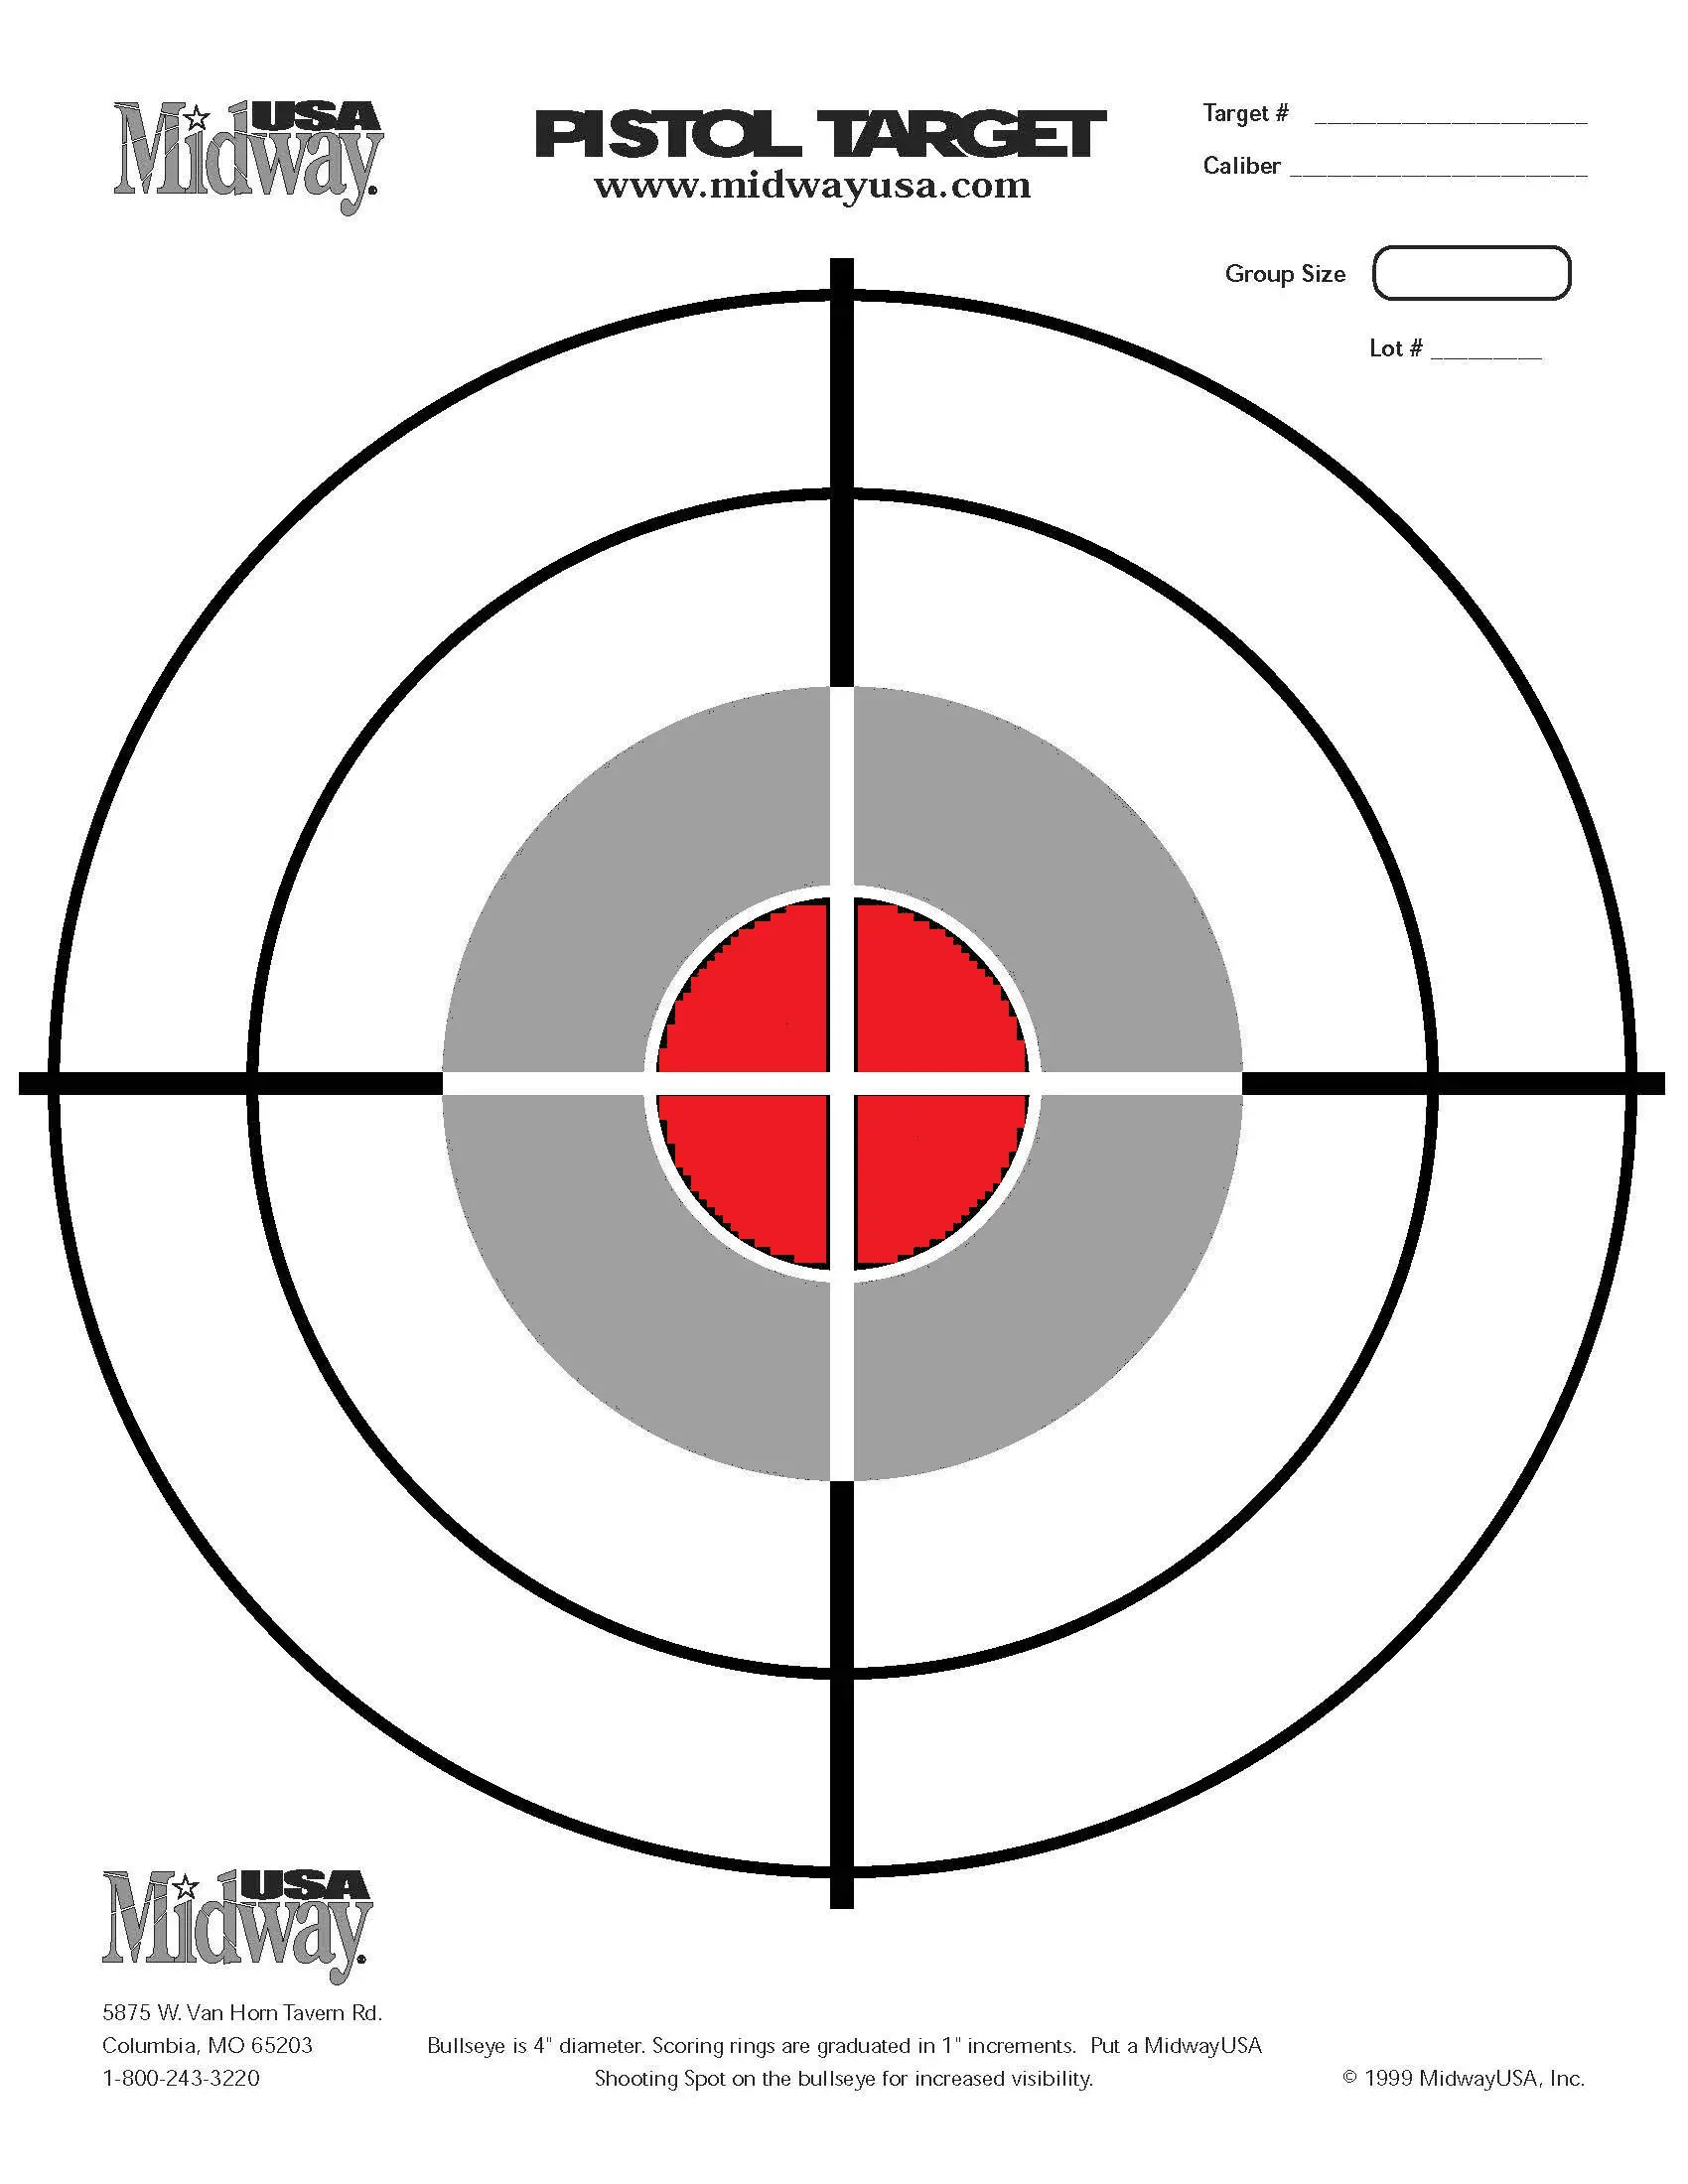 Limited Time Offer! FREE SHIPPING SPECIAL 100 PAPER TARGETS 